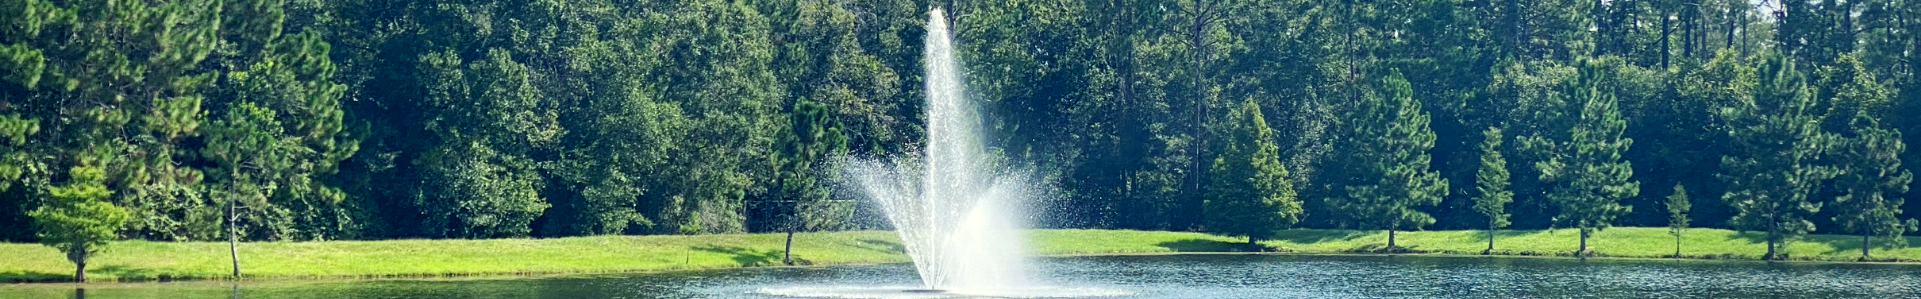 Lake view with water fountain feature